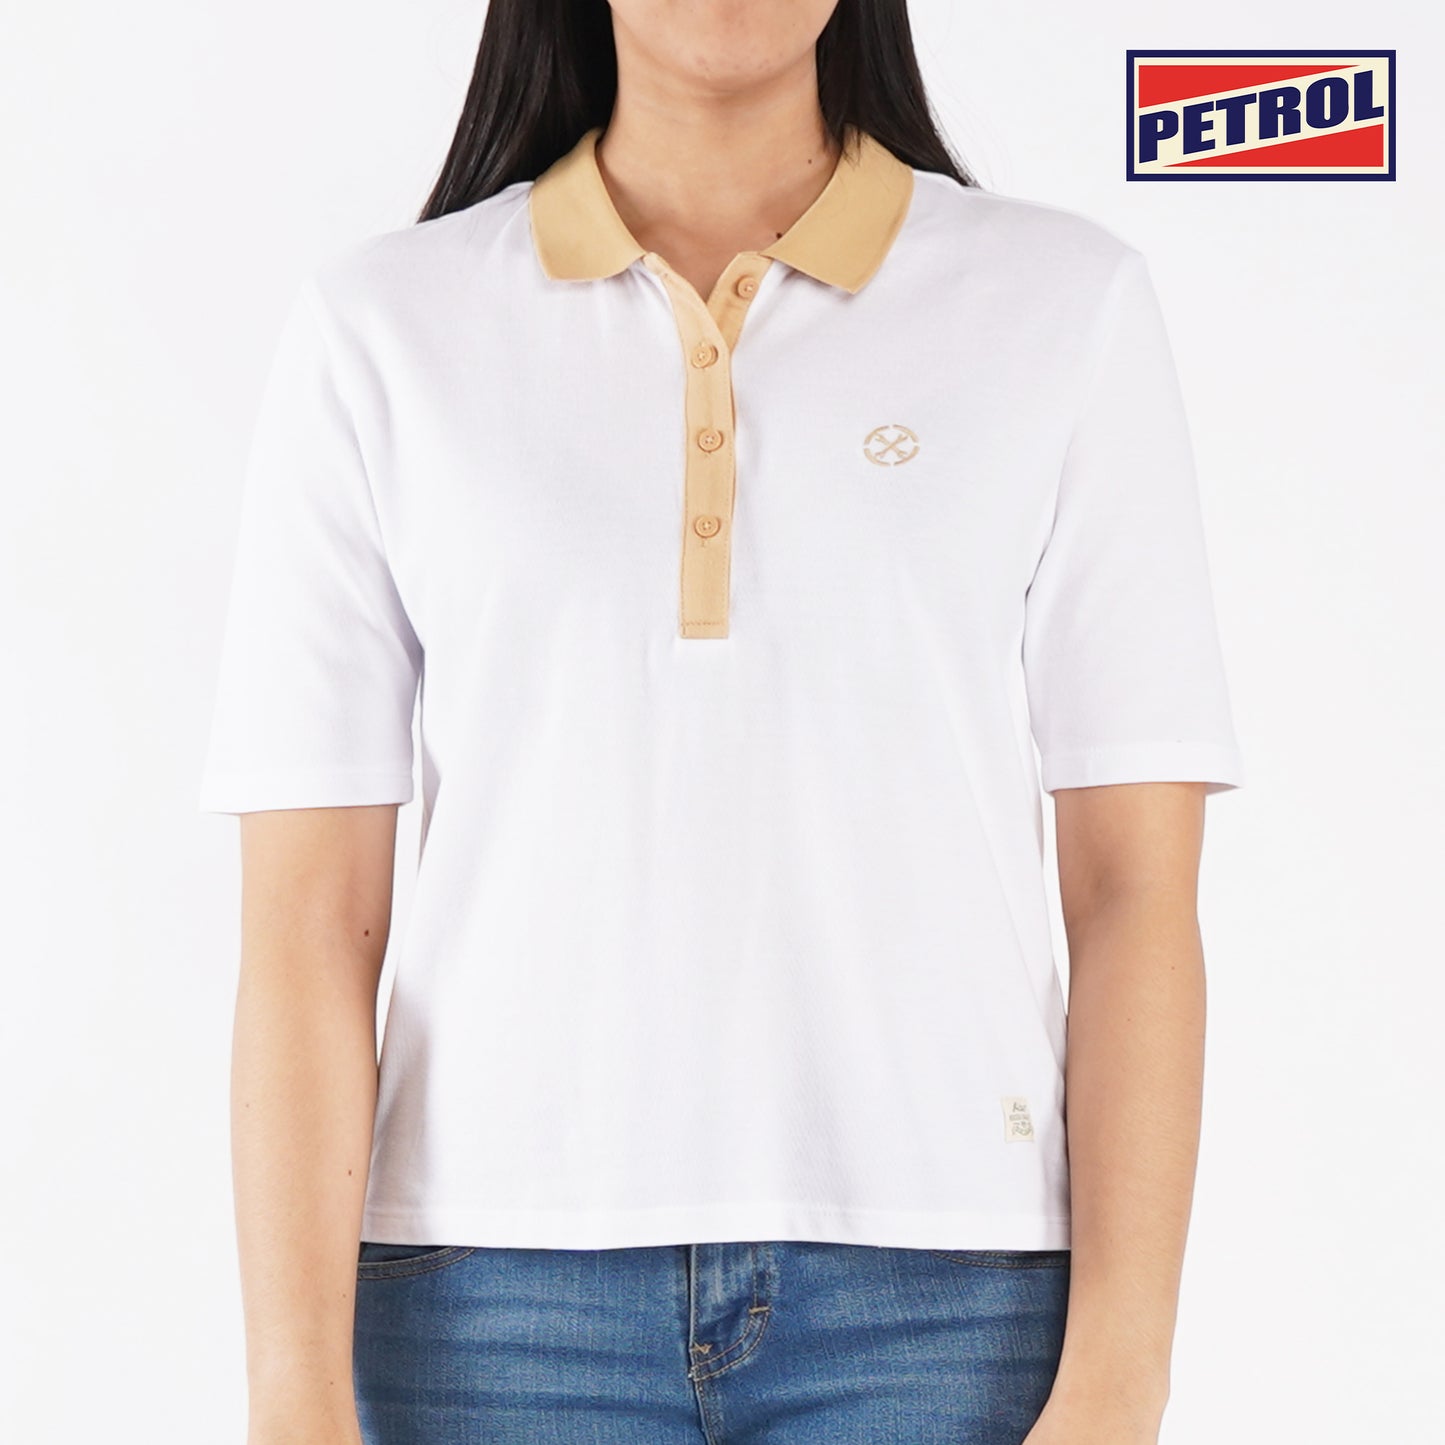 Petrol Basic Collared Shirt for Ladies Boxy Fitting Cotton Jersey Trendy fashion Casual Top White Polo shirt for Ladies 129151 (White)